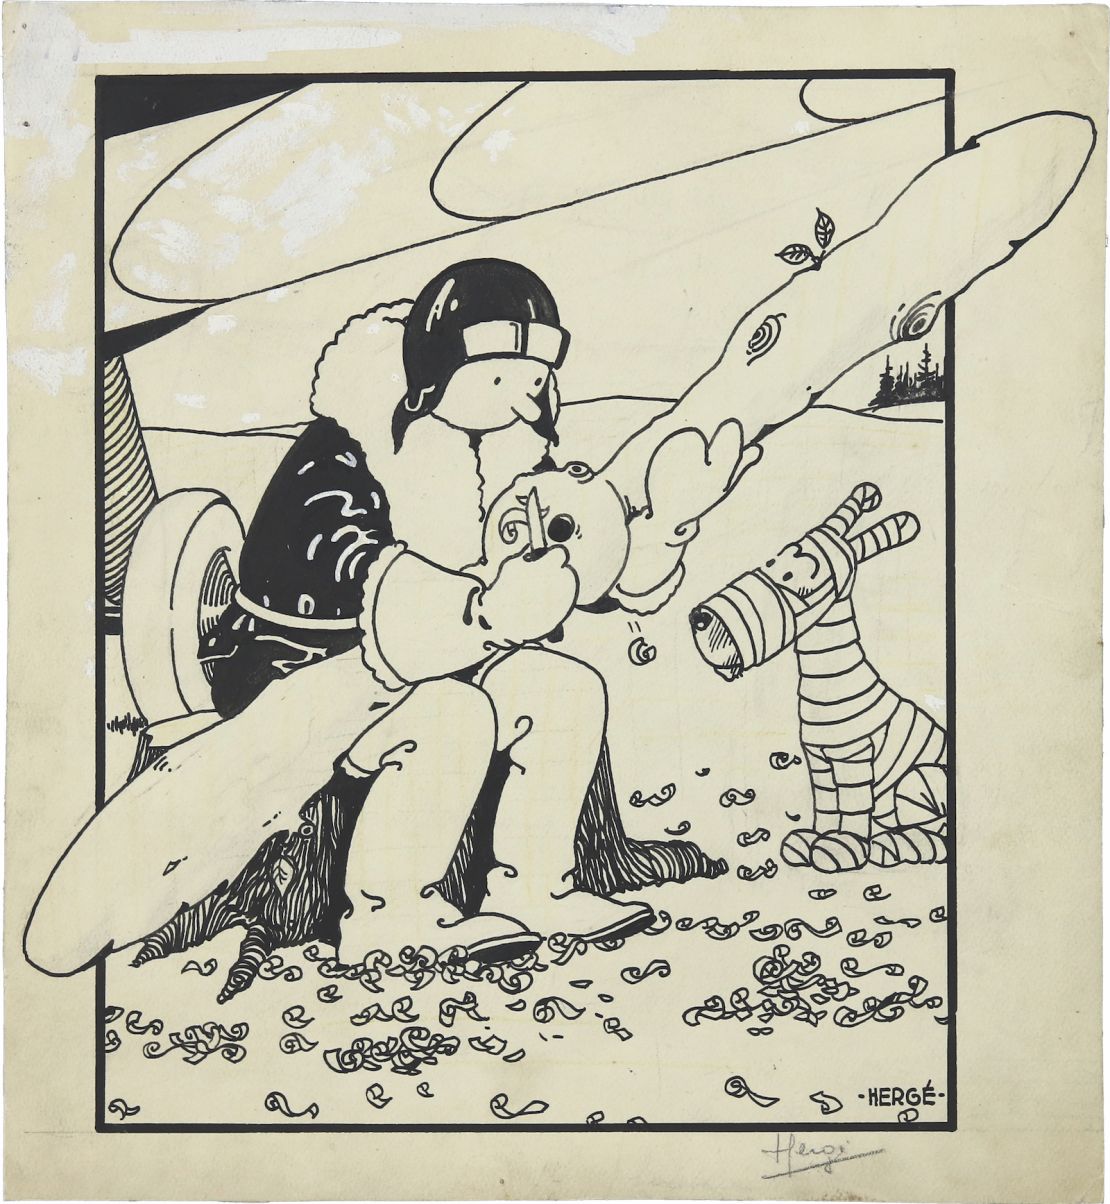 Original cover art from "The Adventures of Tintin Vol. 1: Tintin in the Land of the Soviets."